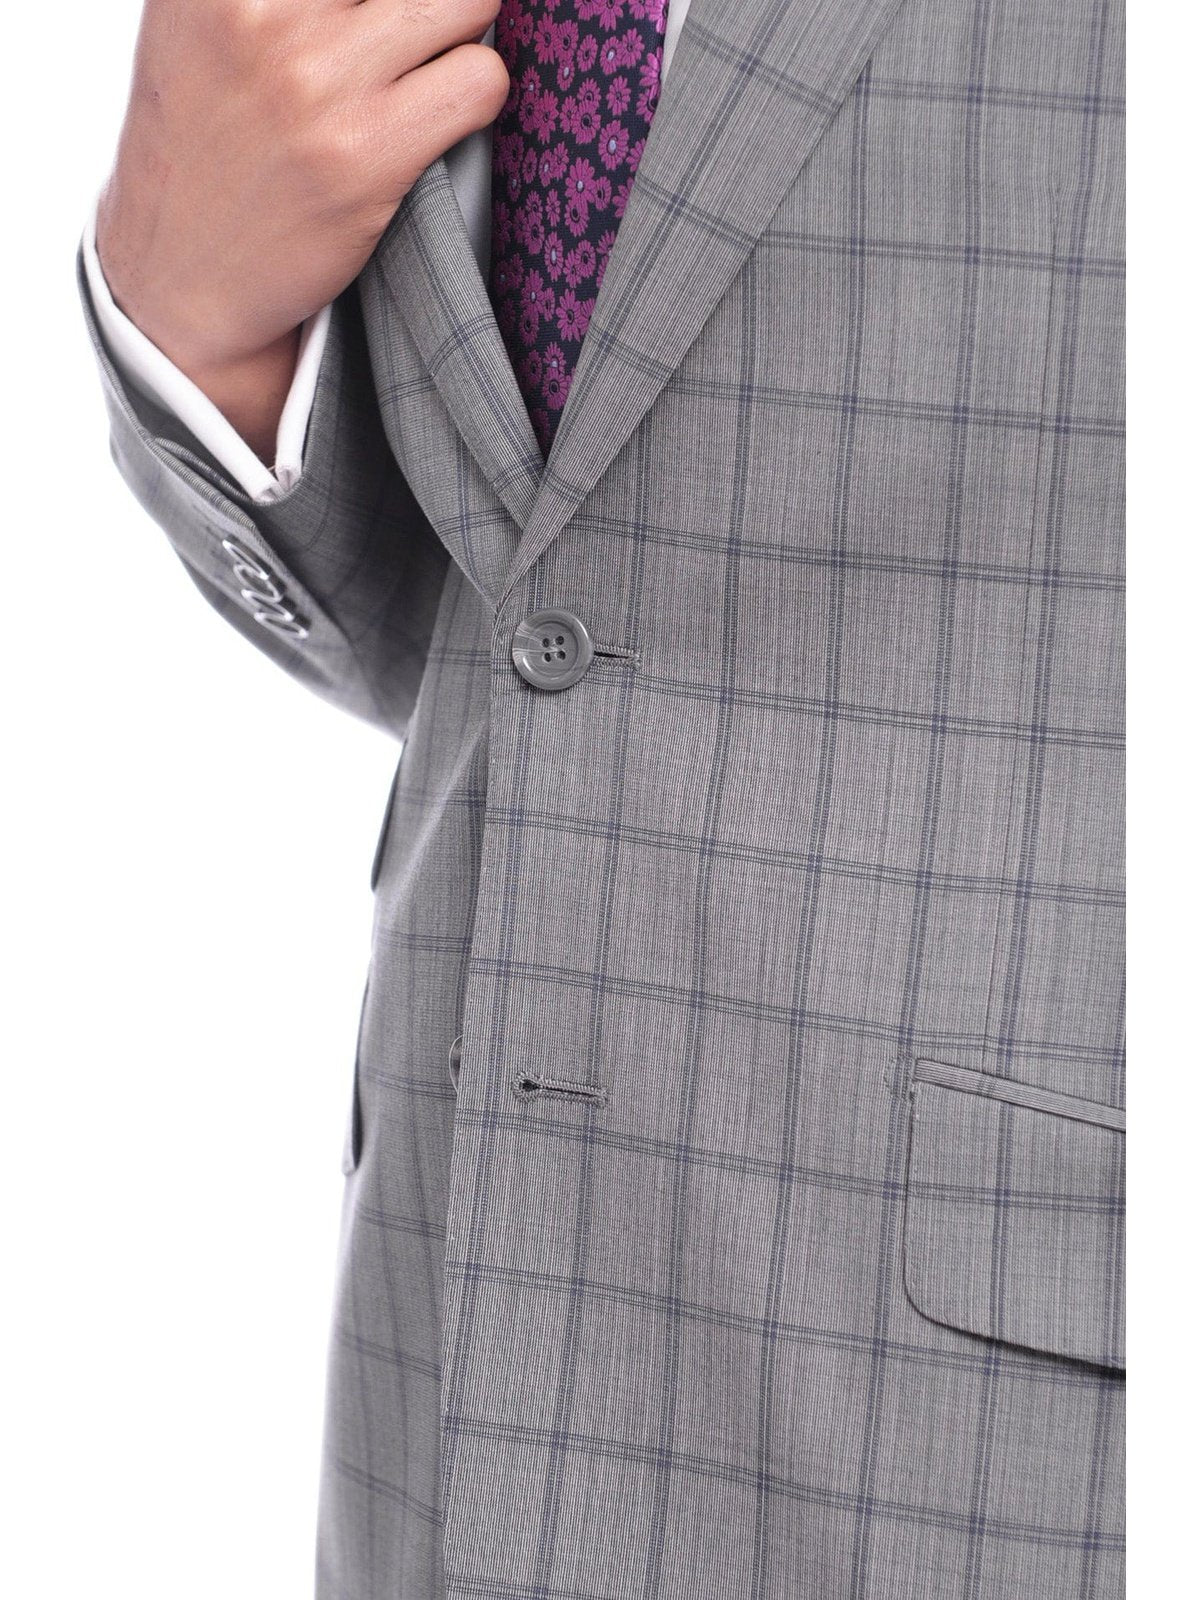 Napoli TWO PIECE SUITS Napoli Slim Fit Gray & Blue Windowpane Plaid Half Canvassed Super 150s Wool Suit